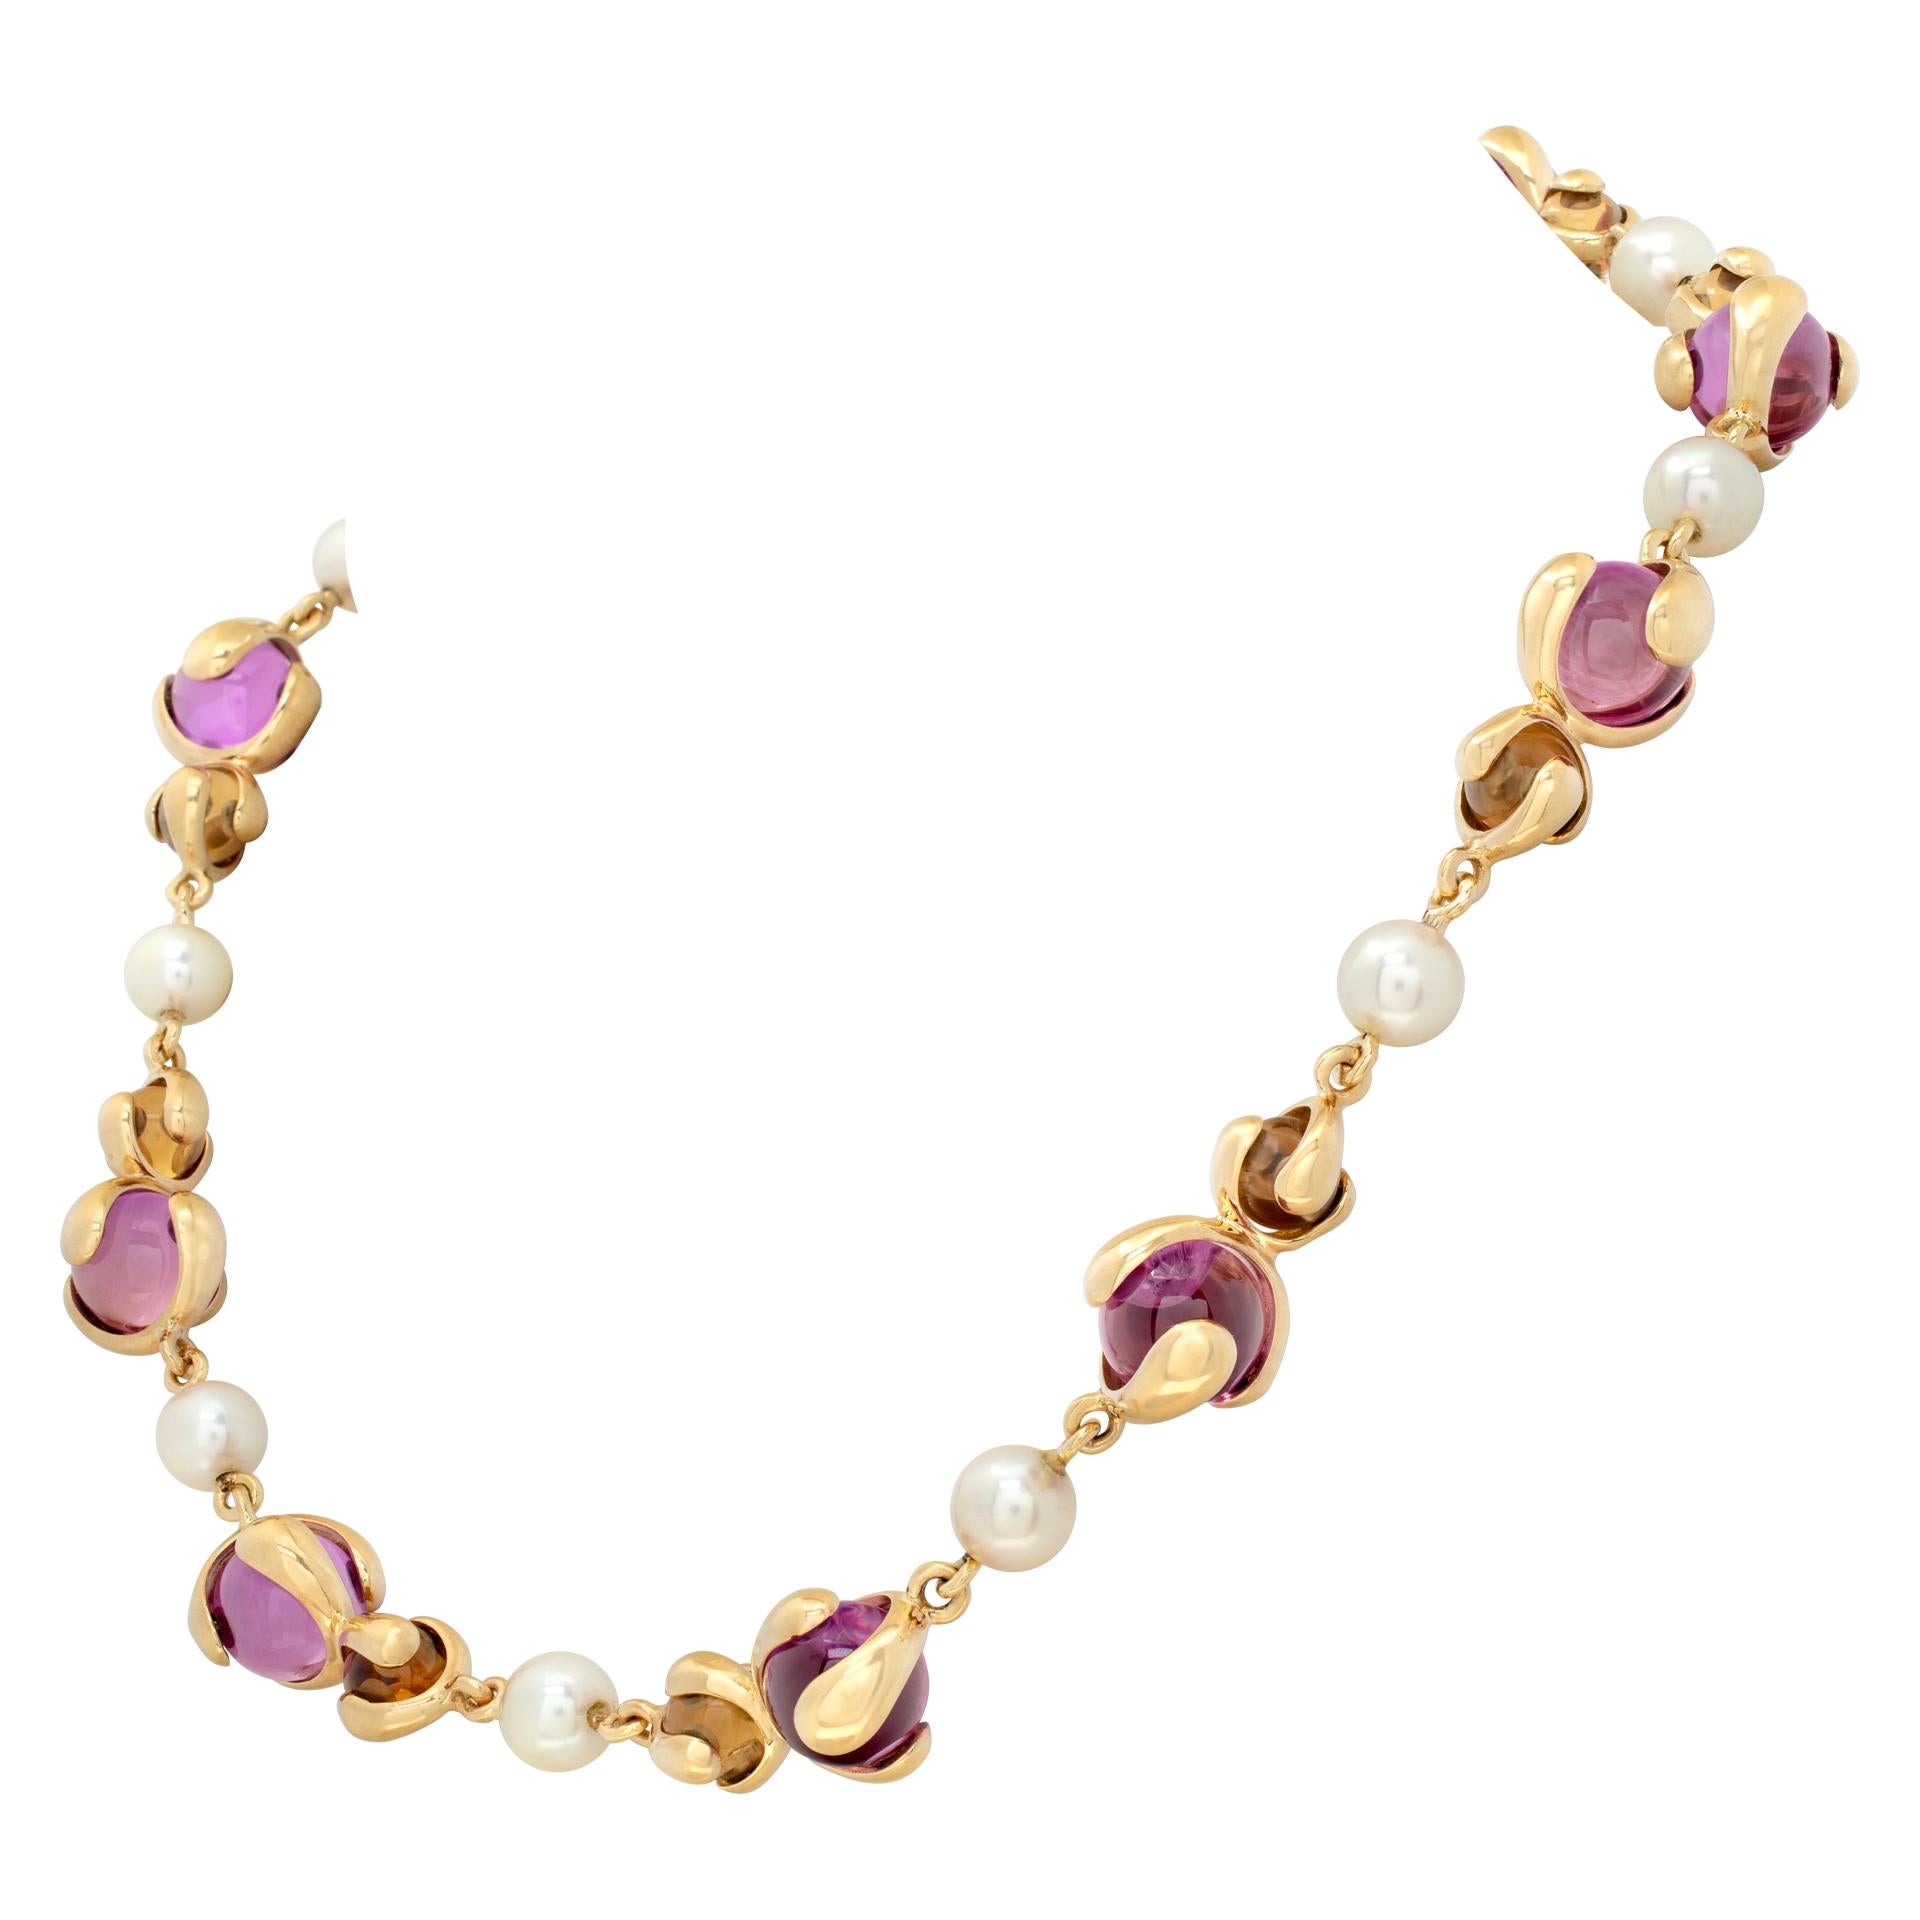 Yellow gold Marina B Cardan Necklace w/ pink Russian quartz, citrine and pearls In Excellent Condition For Sale In Surfside, FL